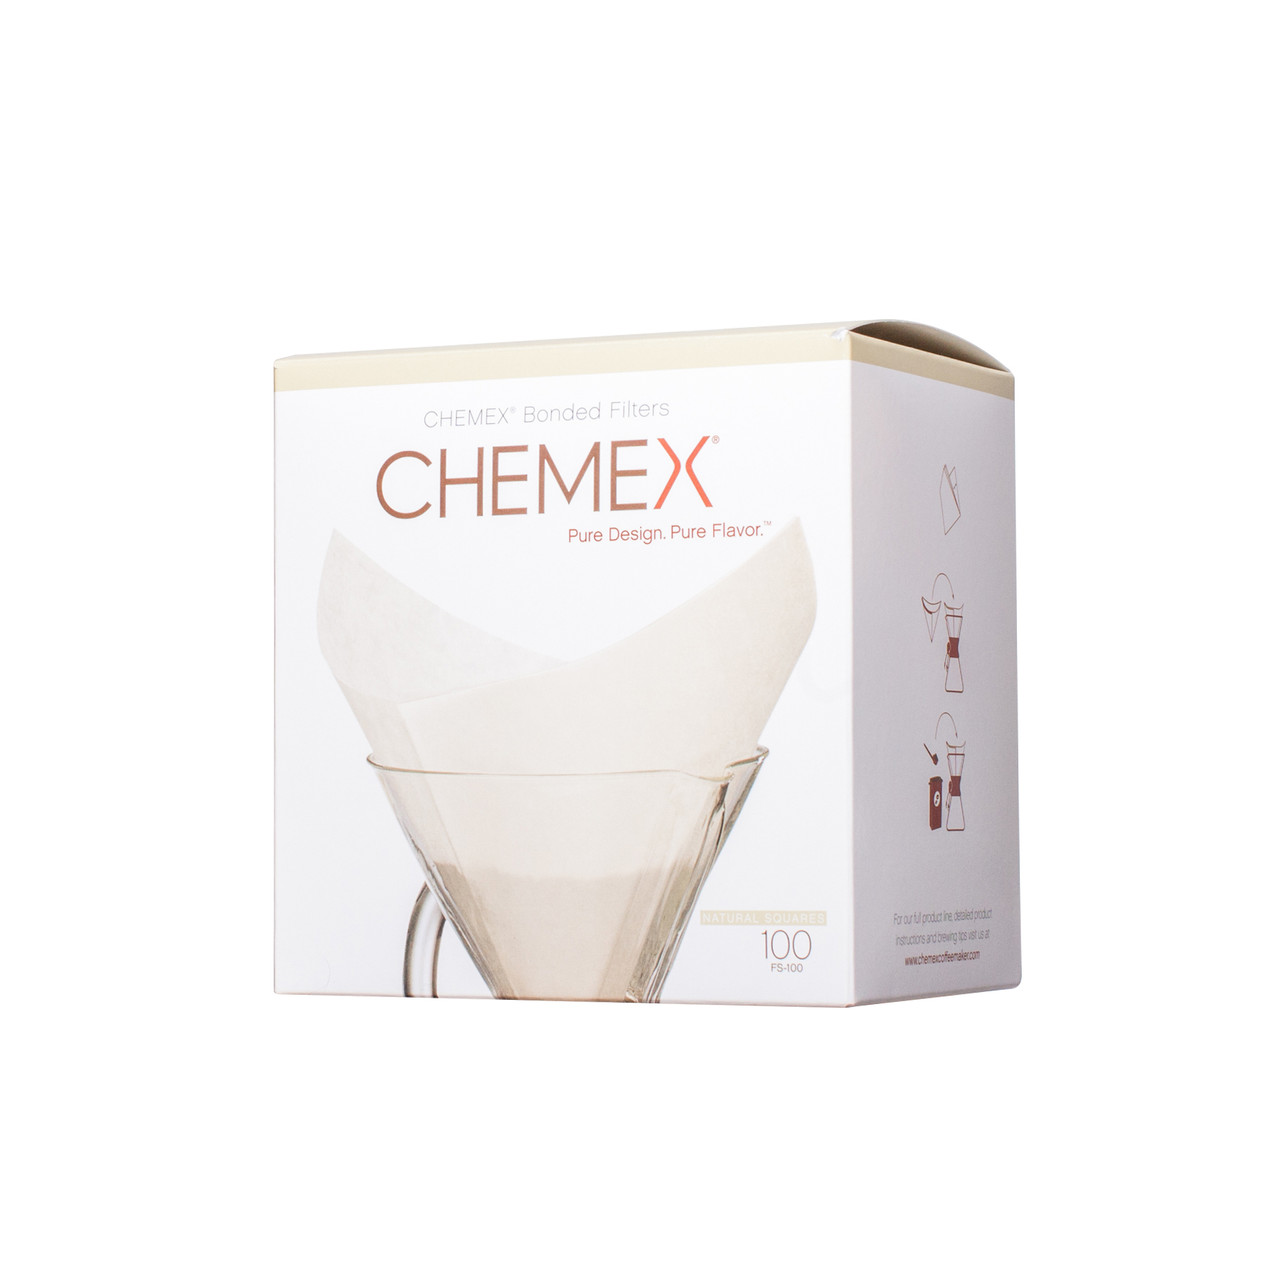 https://cdn11.bigcommerce.com/s-6h7ychjk4/images/stencil/1280x1280/products/8111/88989/chemex-bonded-filters-natural-squares-white-100-2-copy__43056.1597181006.jpg?c=1